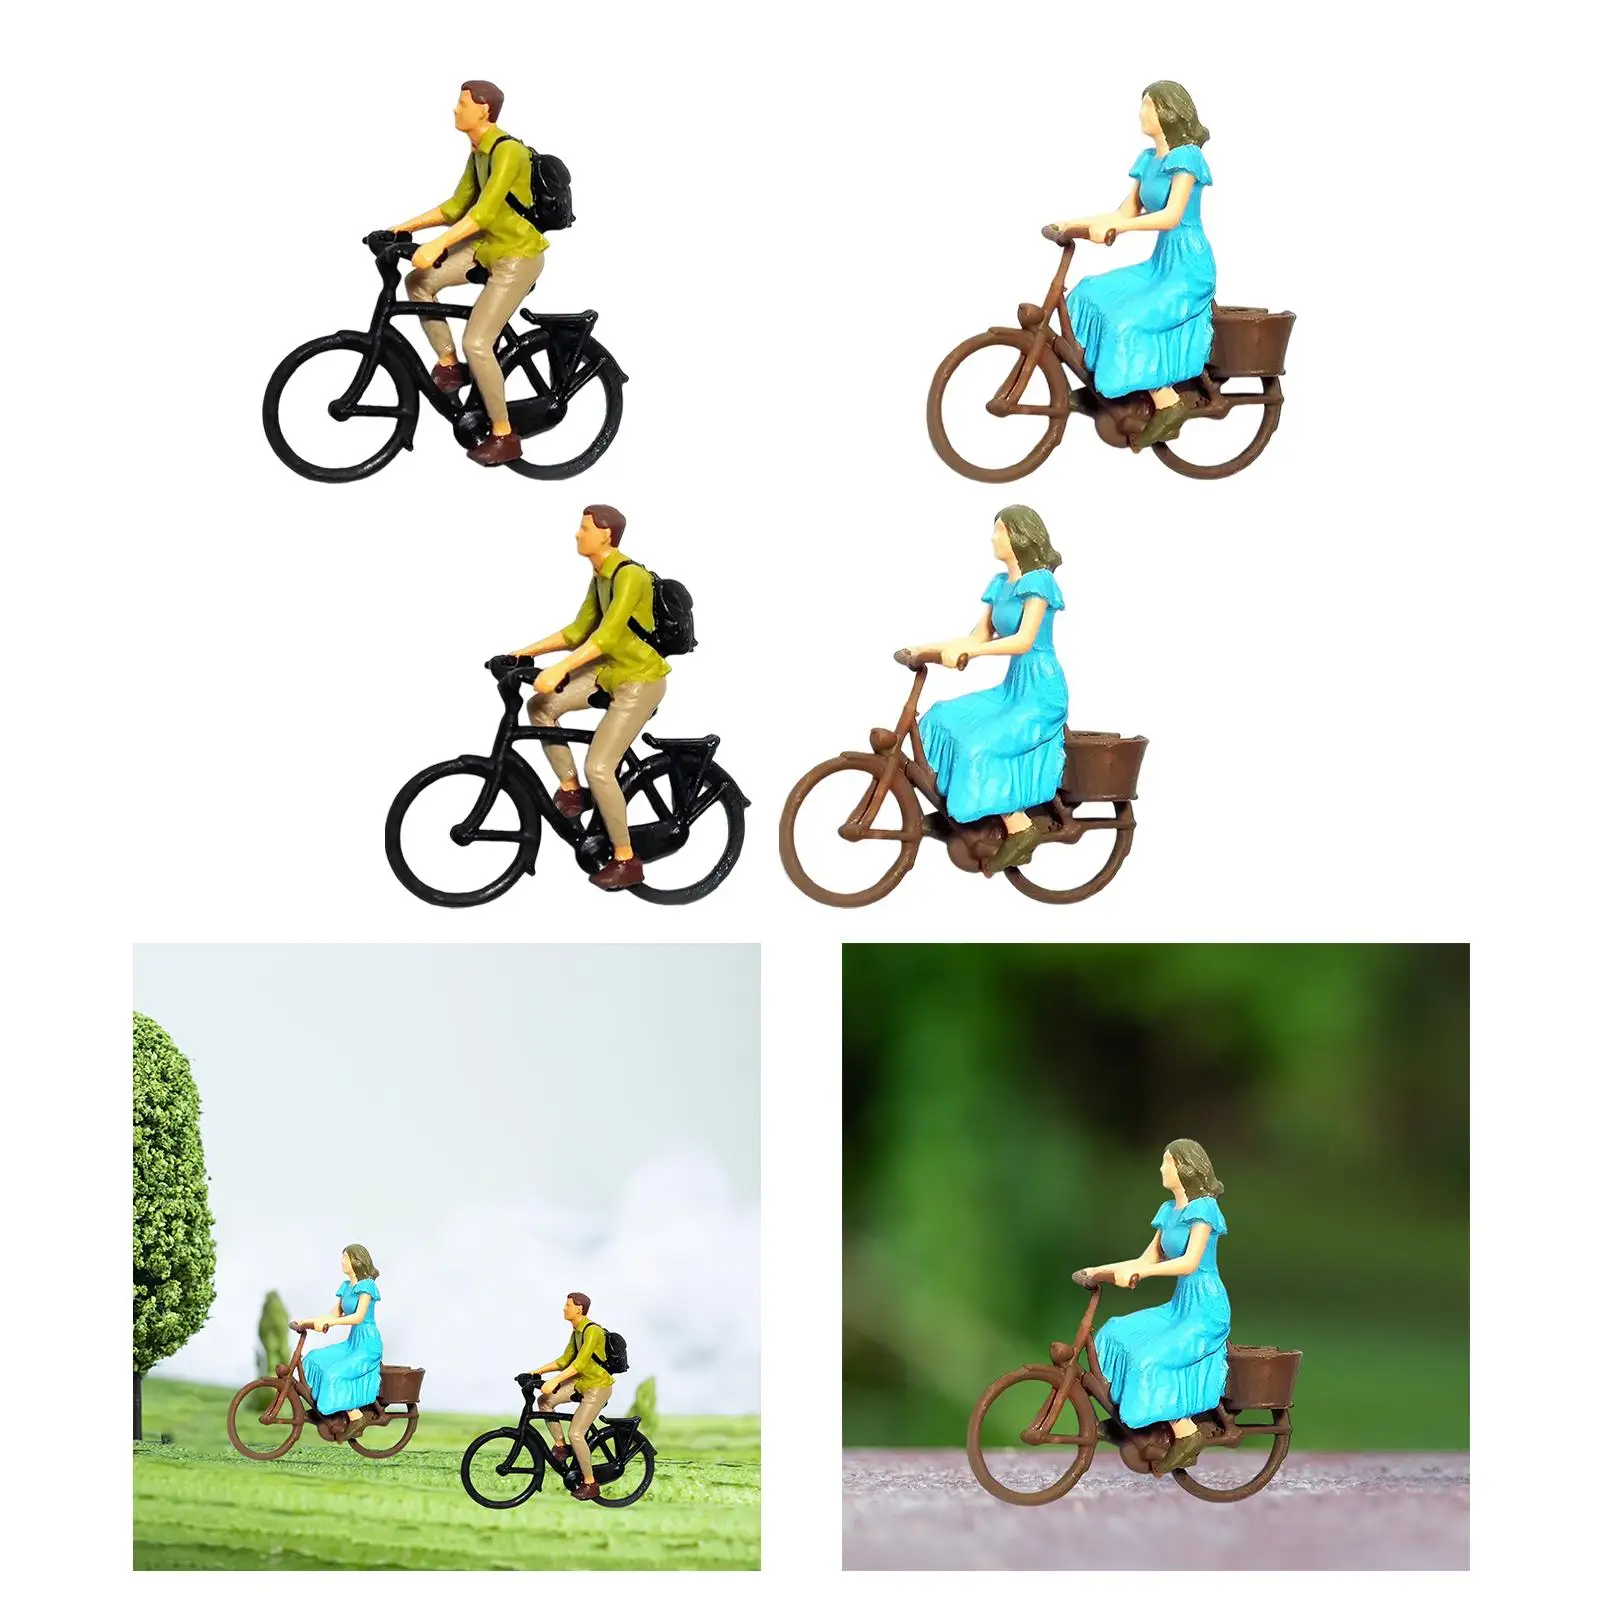 Resin 1/87 Scale Cyclist Figurine Mini People Model for Cycling Scene Layout